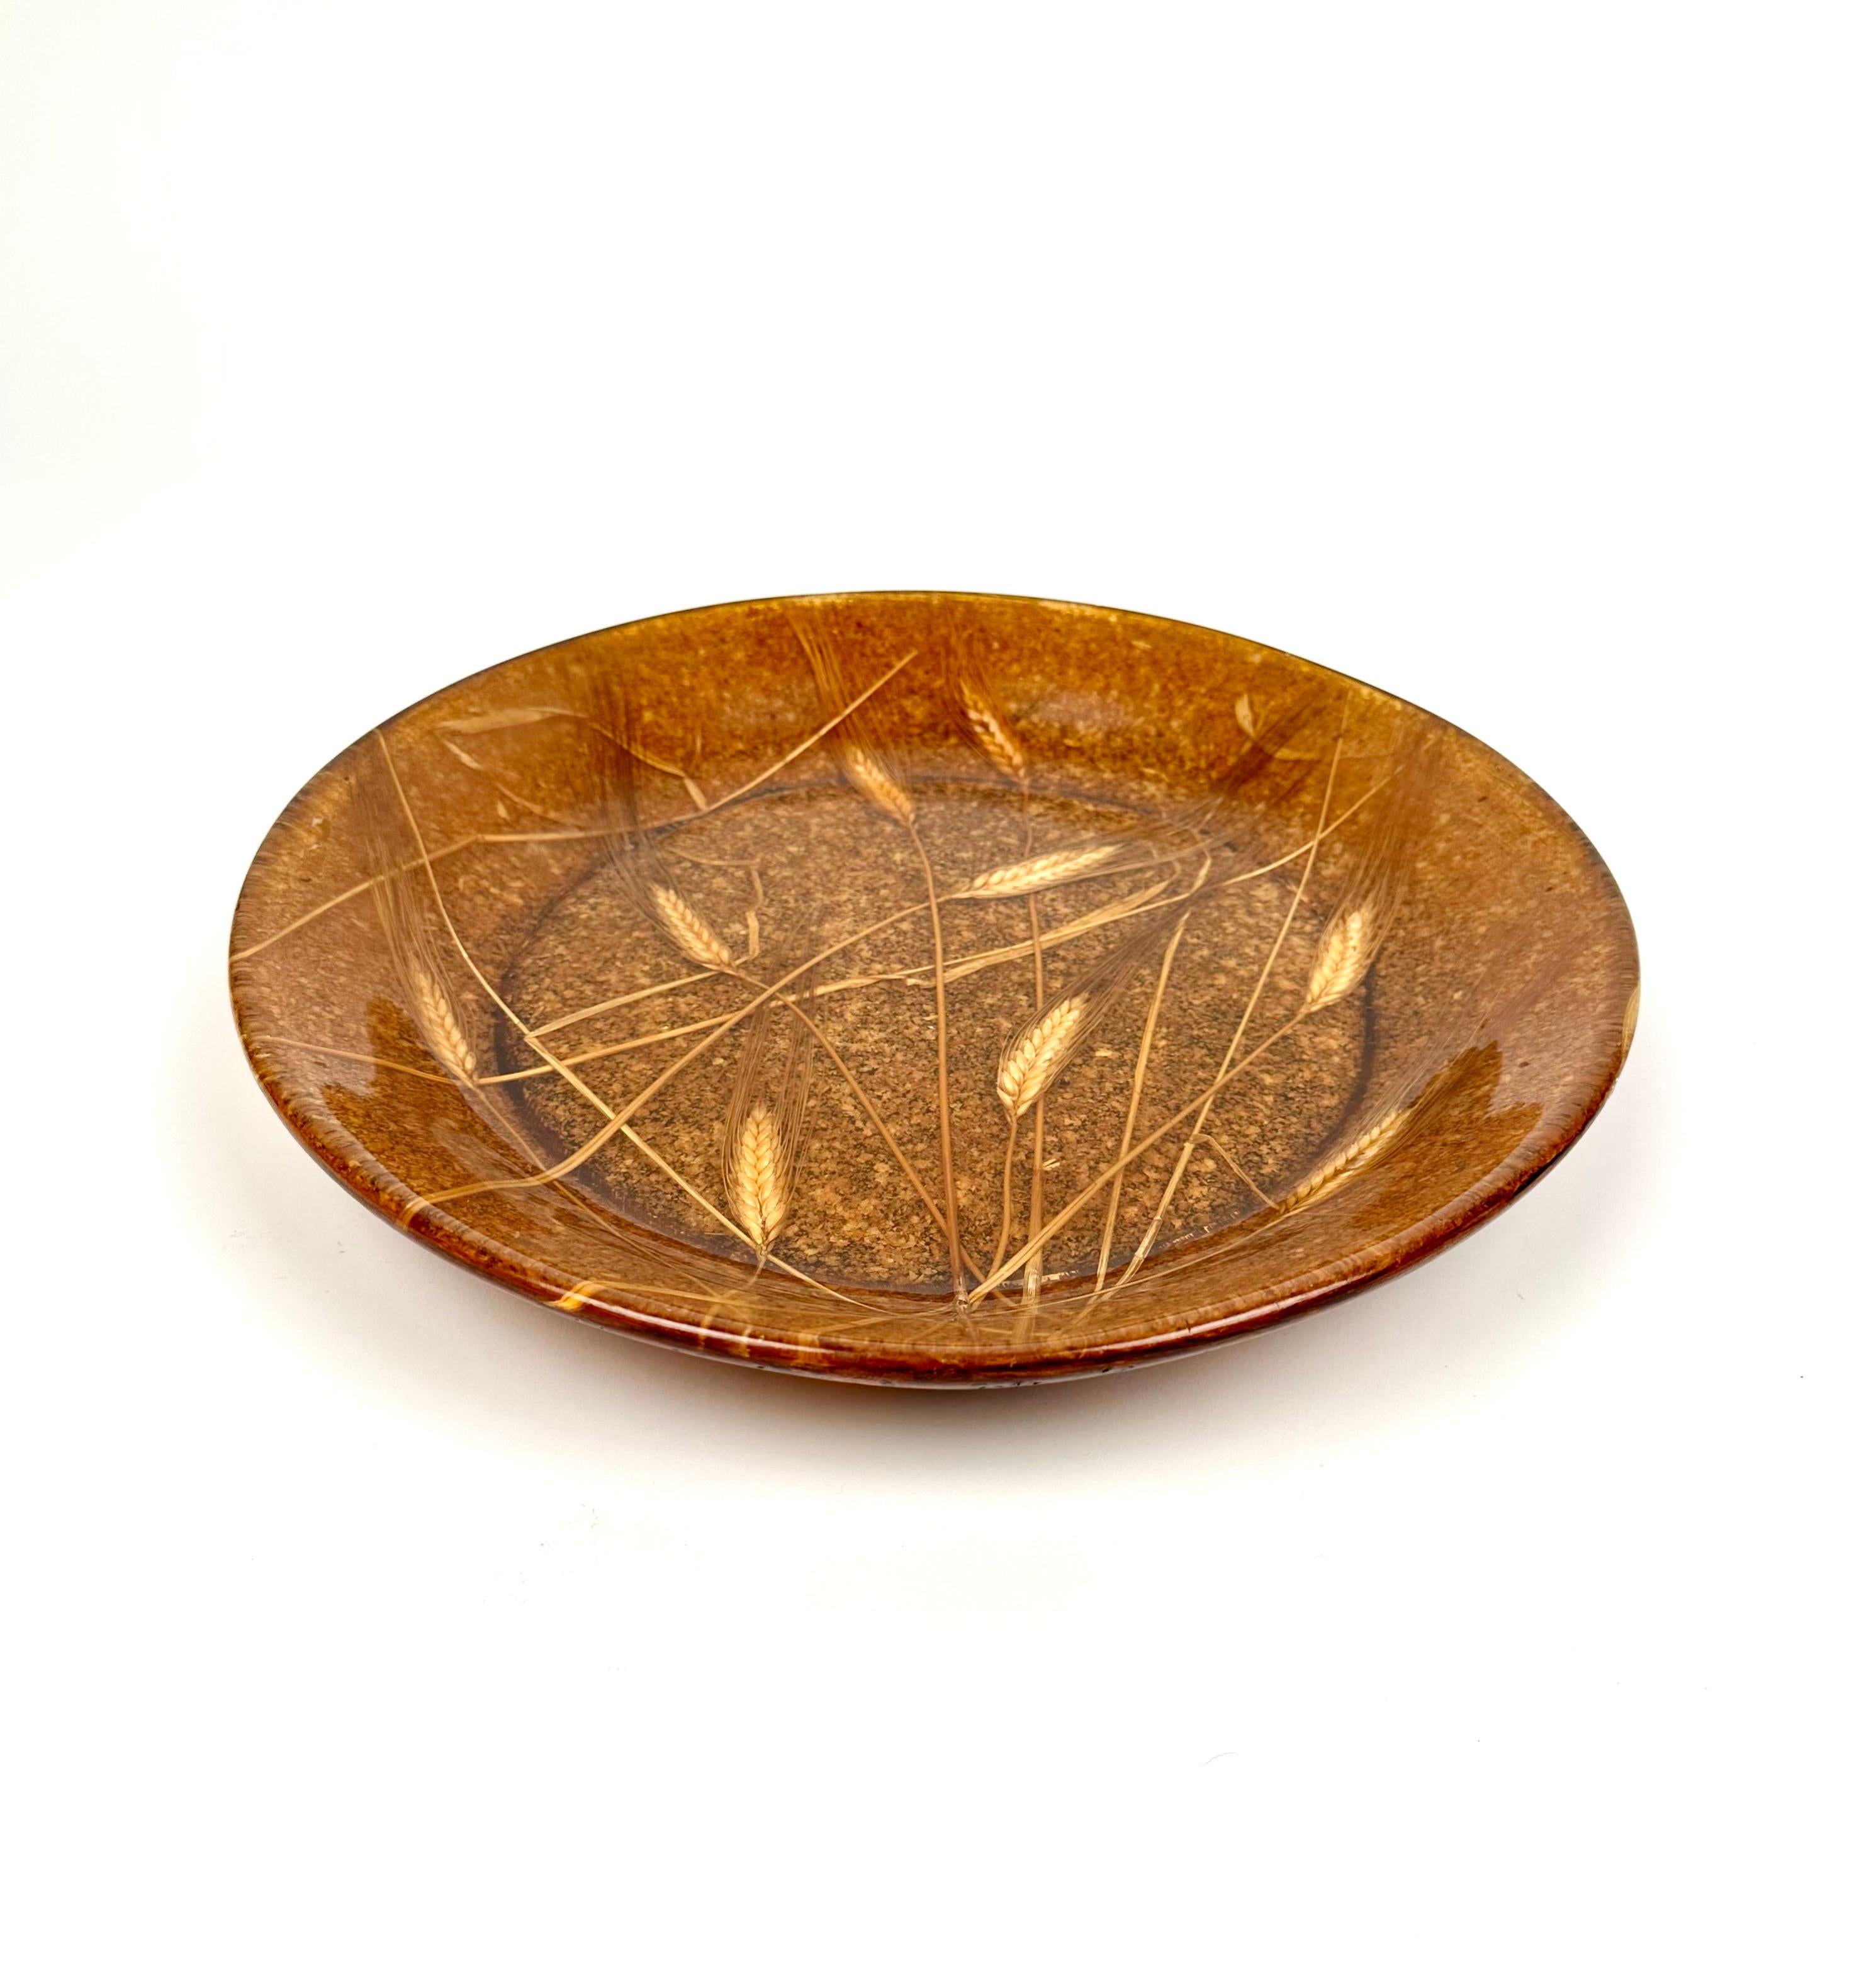 Mid-Century Modern Round Centerpiece Plate in Acrylic with Ears of Wheat Inclusions, Italy 1970s For Sale